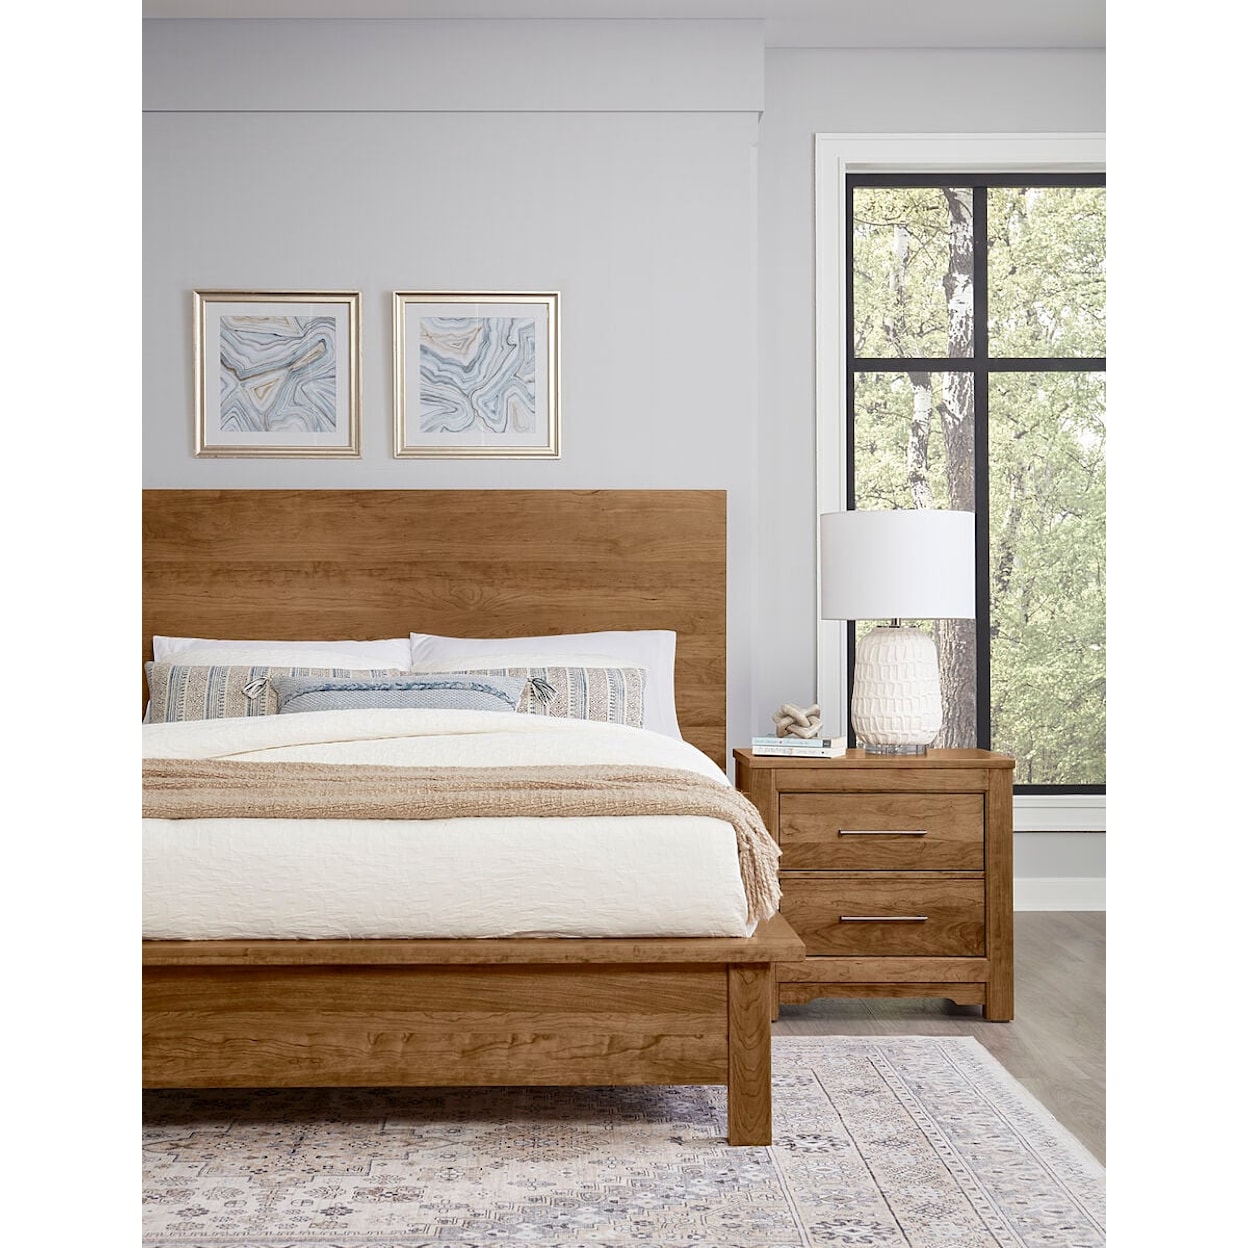 Virginia House Crafted Cherry - Medium King Terrace Bed